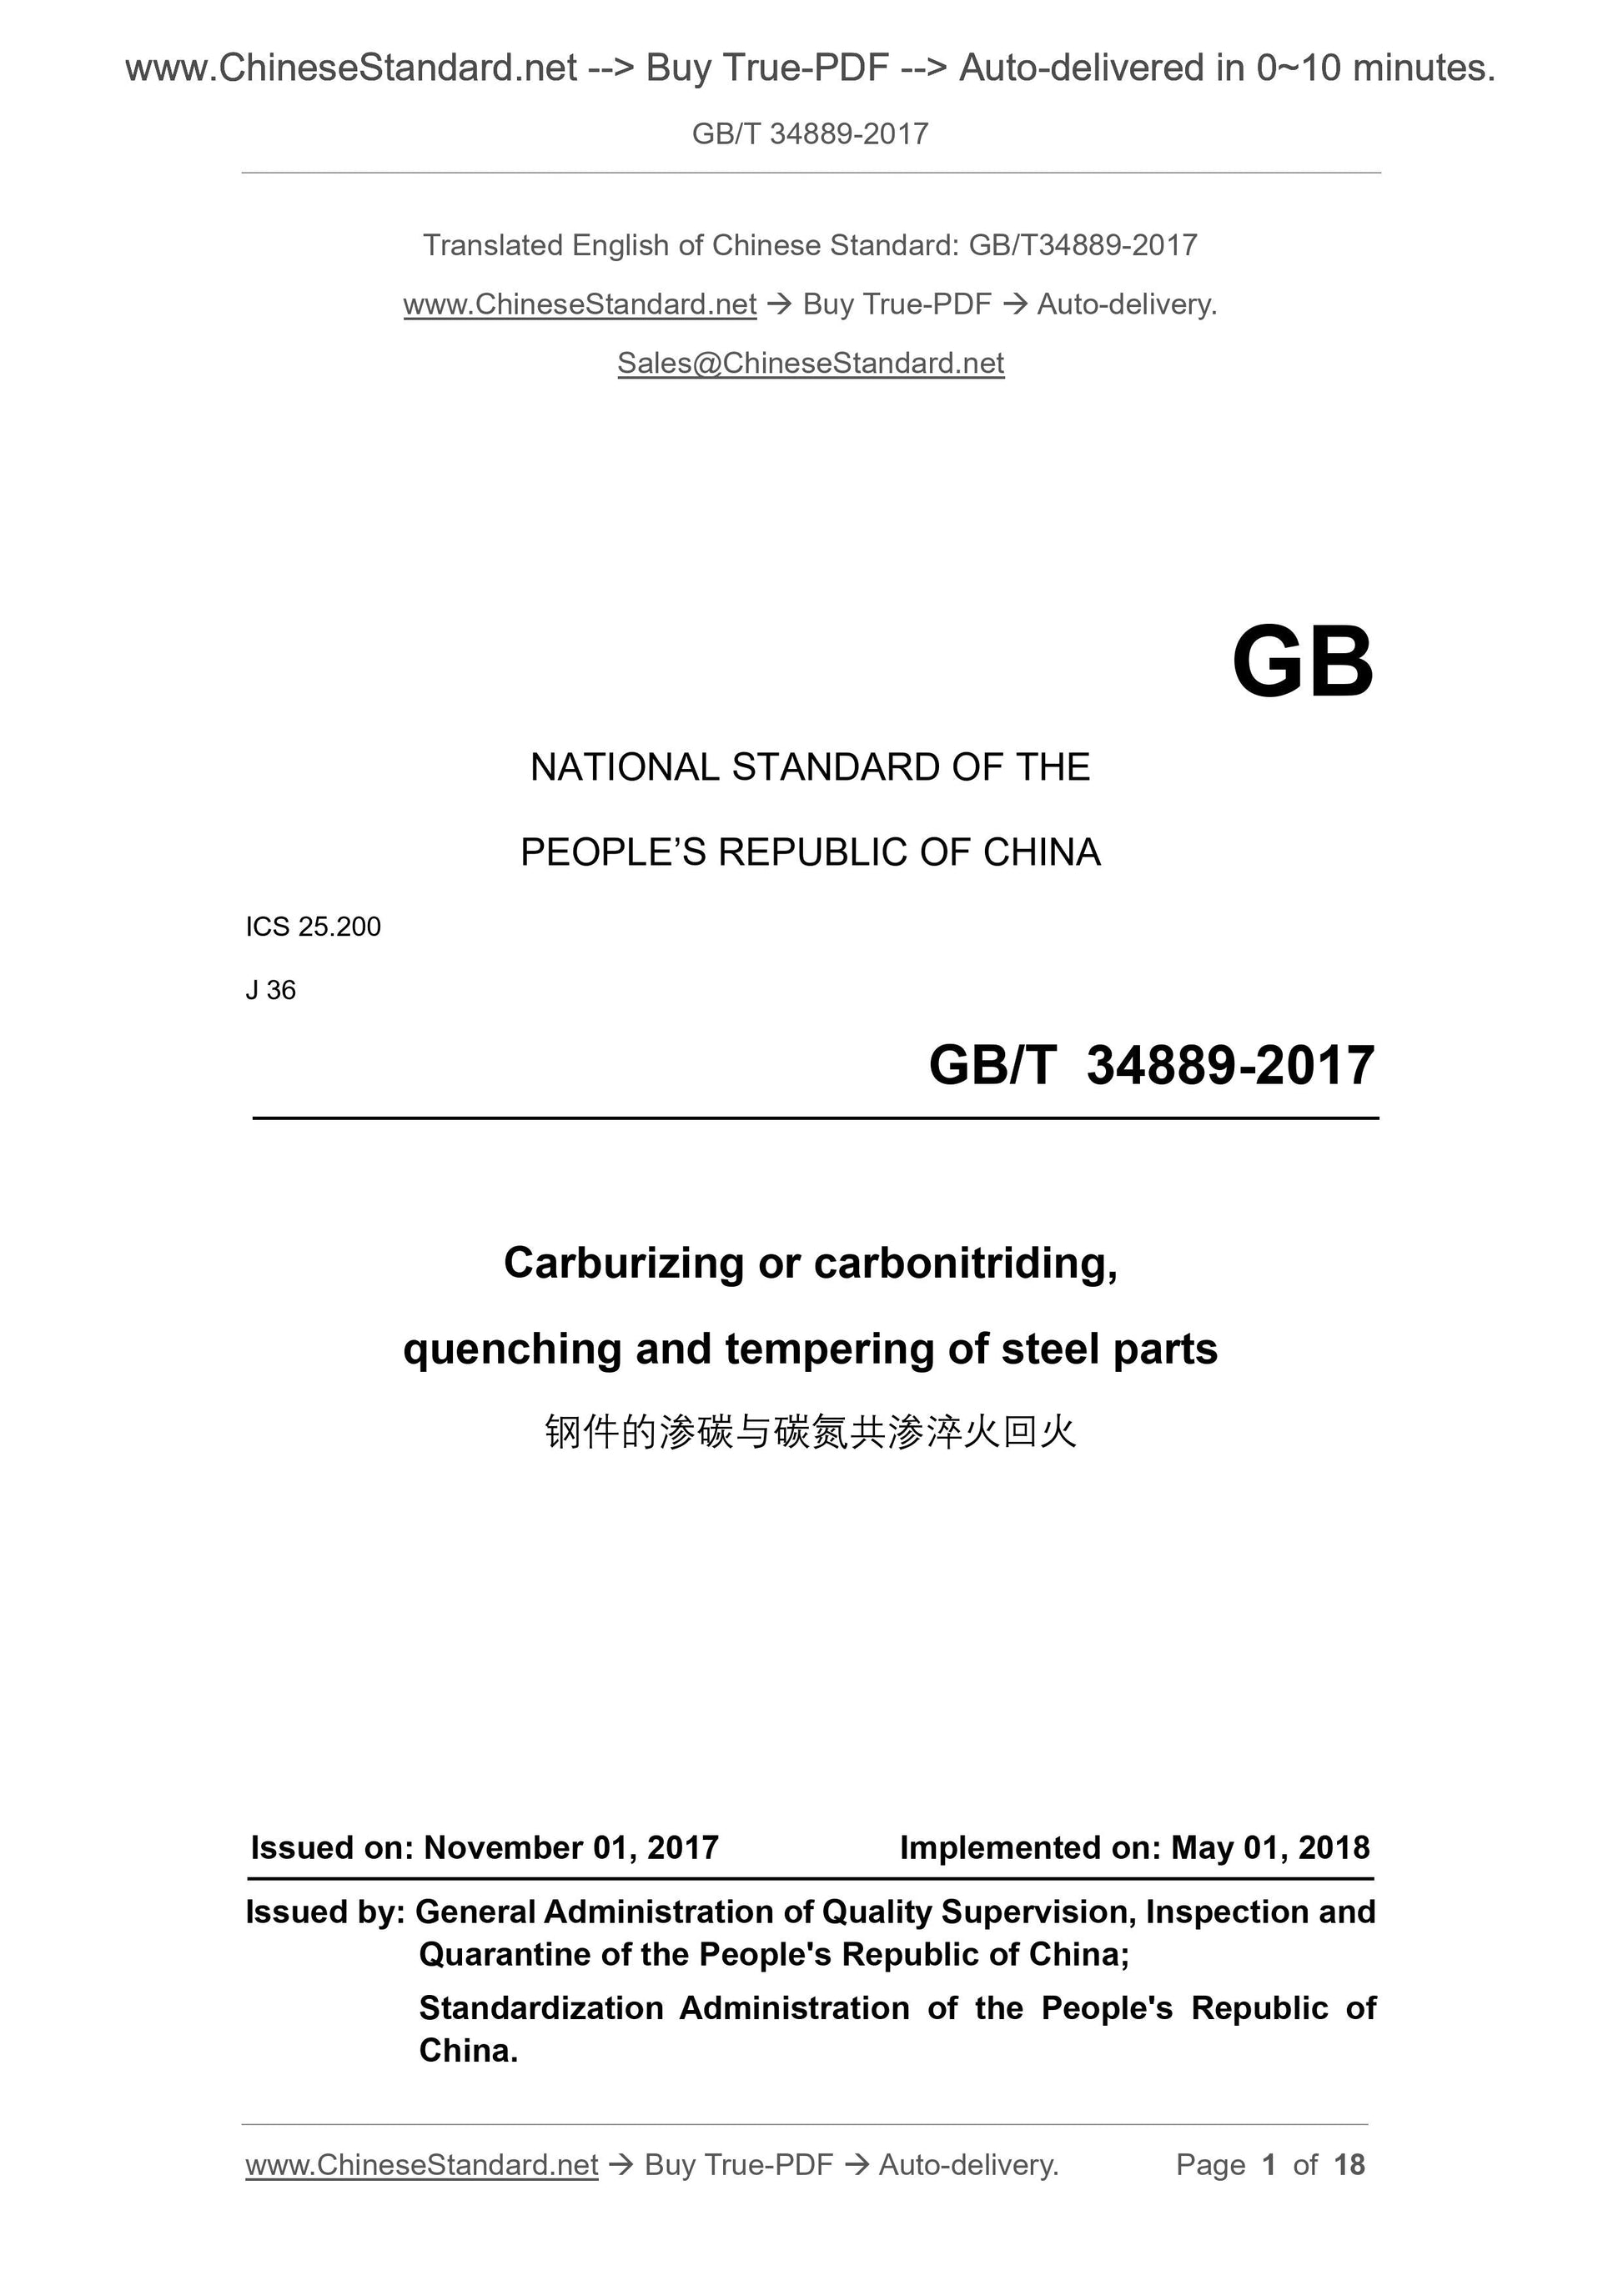 GB/T 34889-2017 Page 1